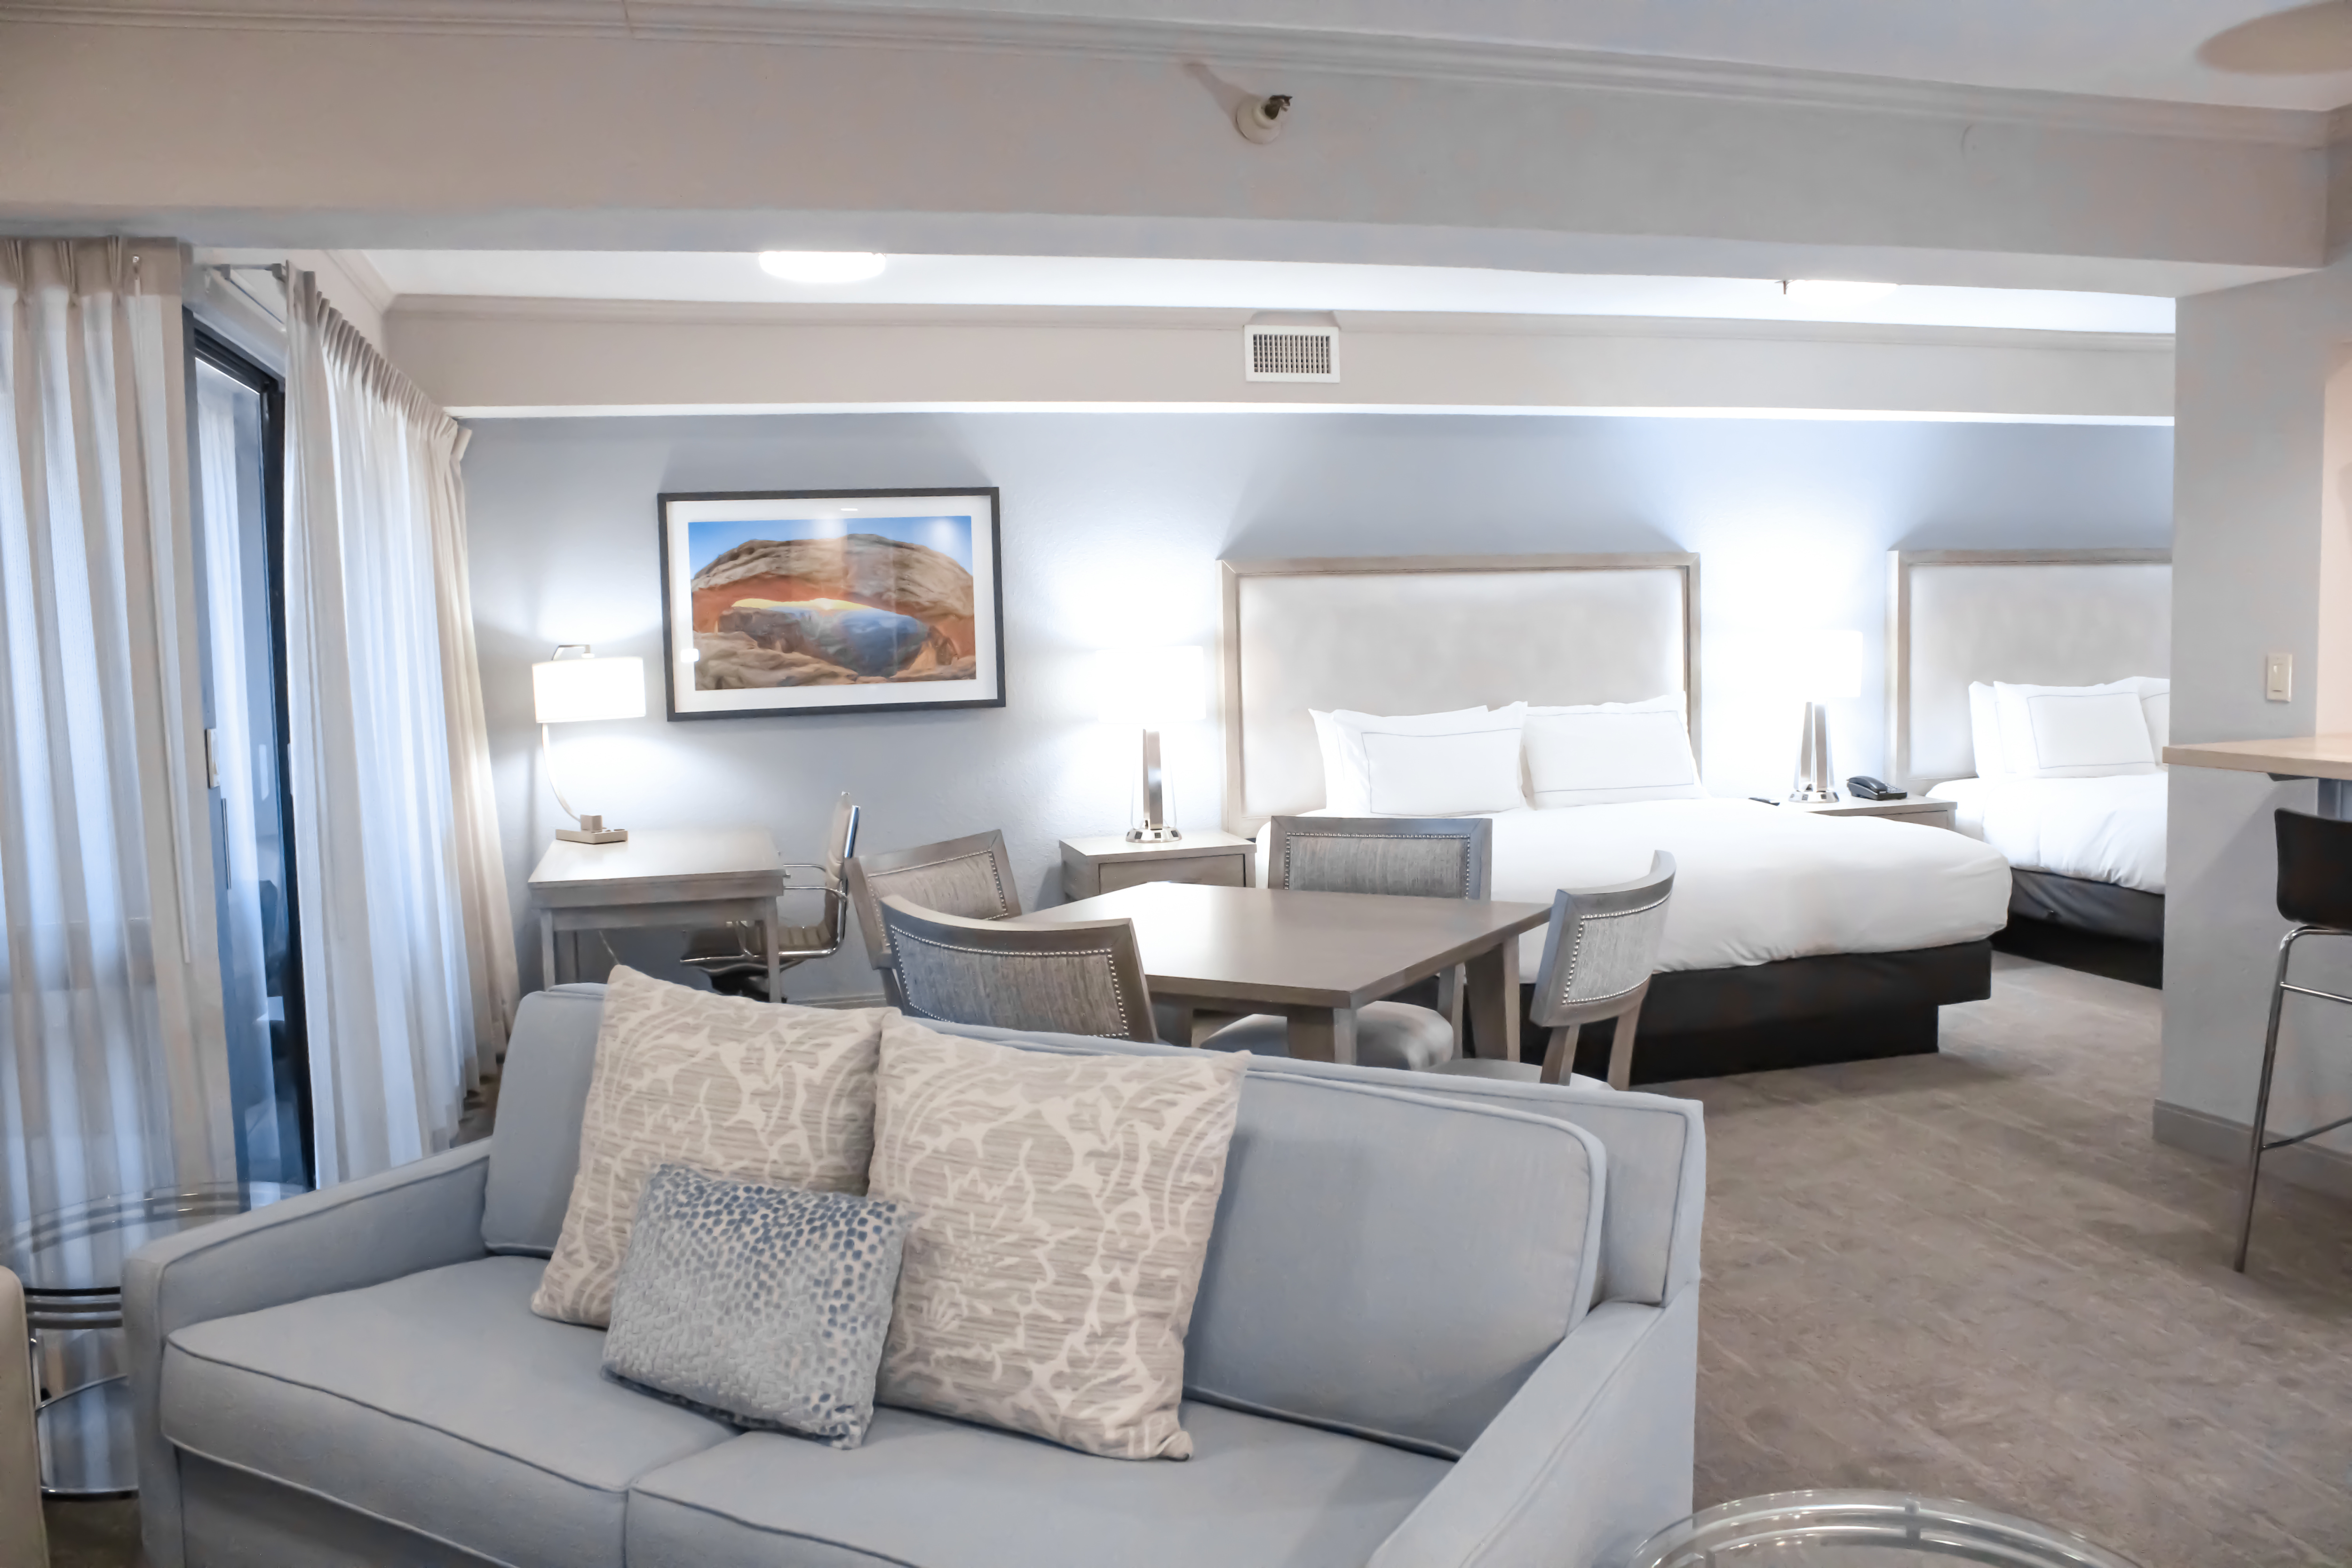 Suite lounge area sofa and two king beds in view